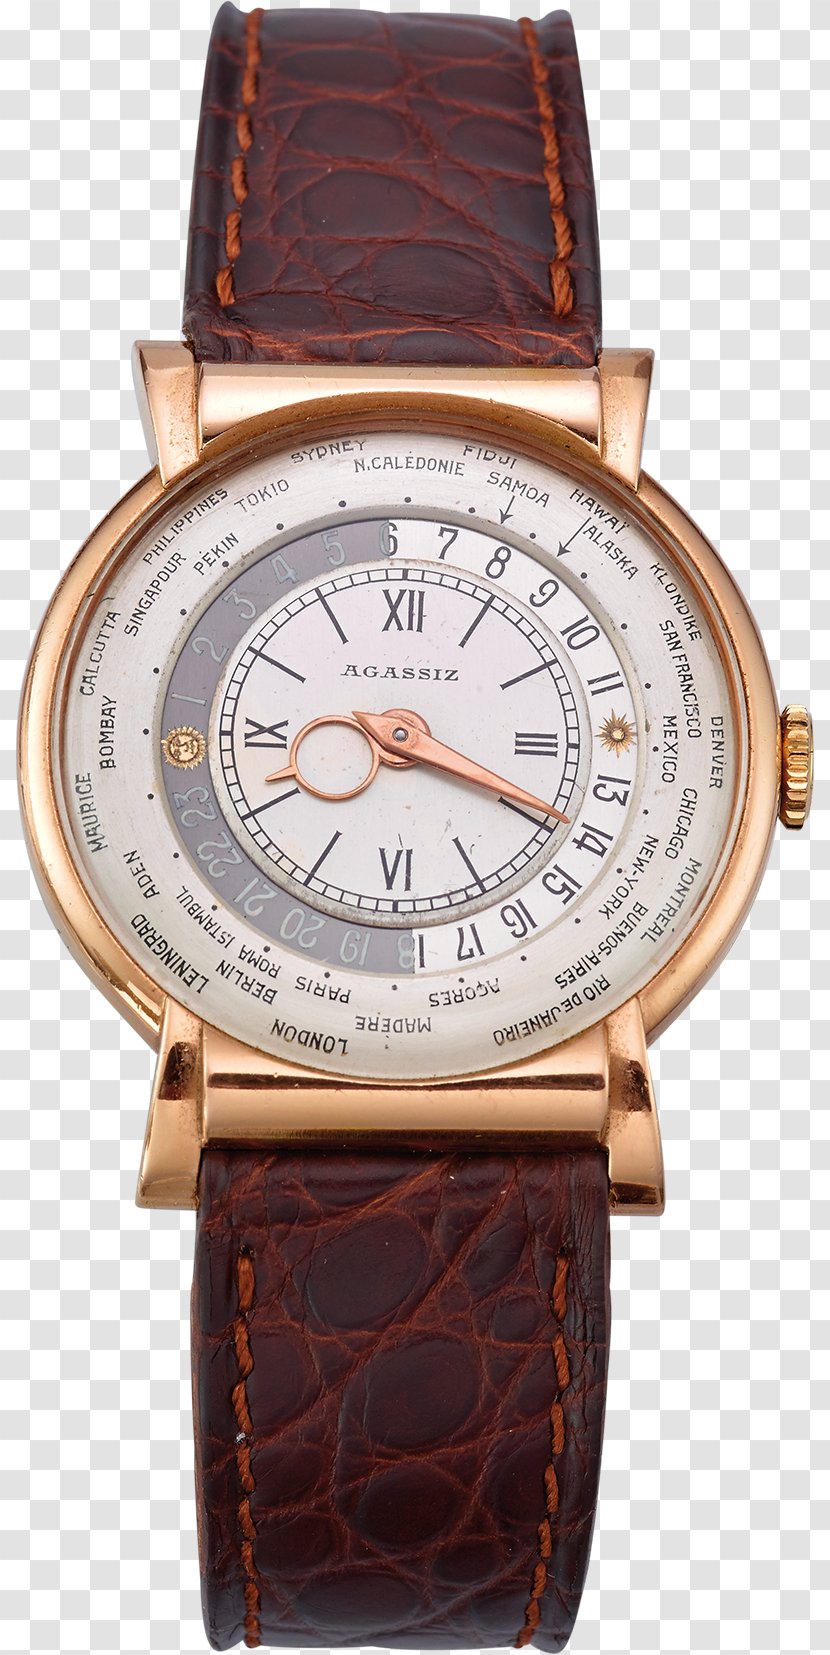 Watch Online Shopping Gant Clothing Accessories Otto GmbH Transparent PNG